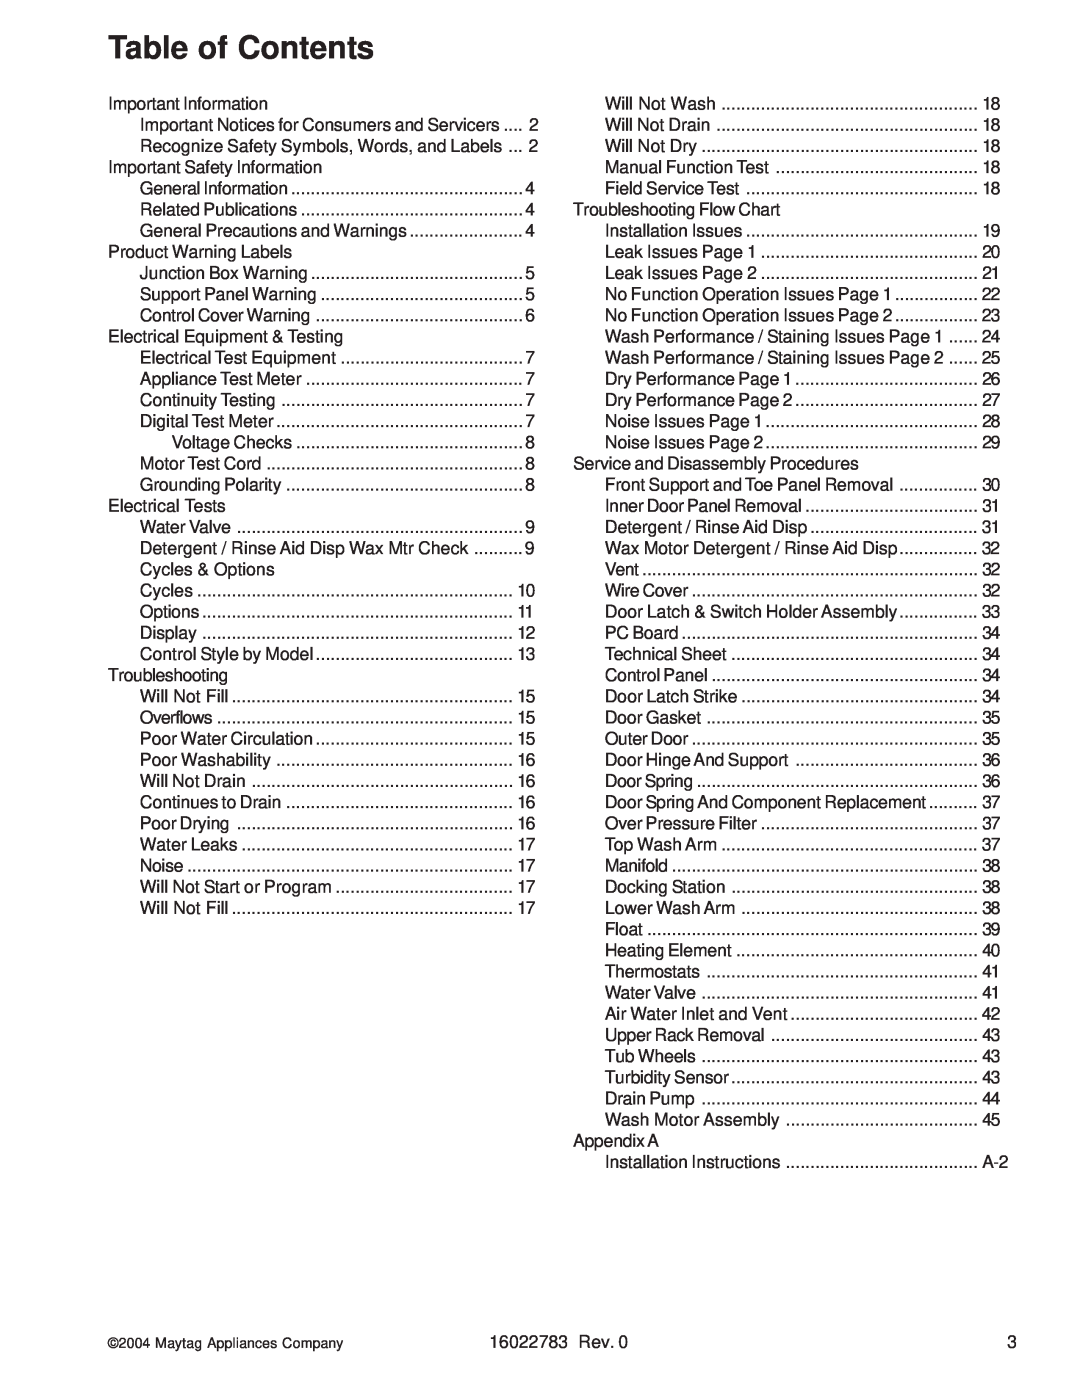 Maytag JDB2100AW, MDB8750AW, MDB9750AW, JDB2150AWP, JDB1100AW, JDB1060AW manual Table of Contents 